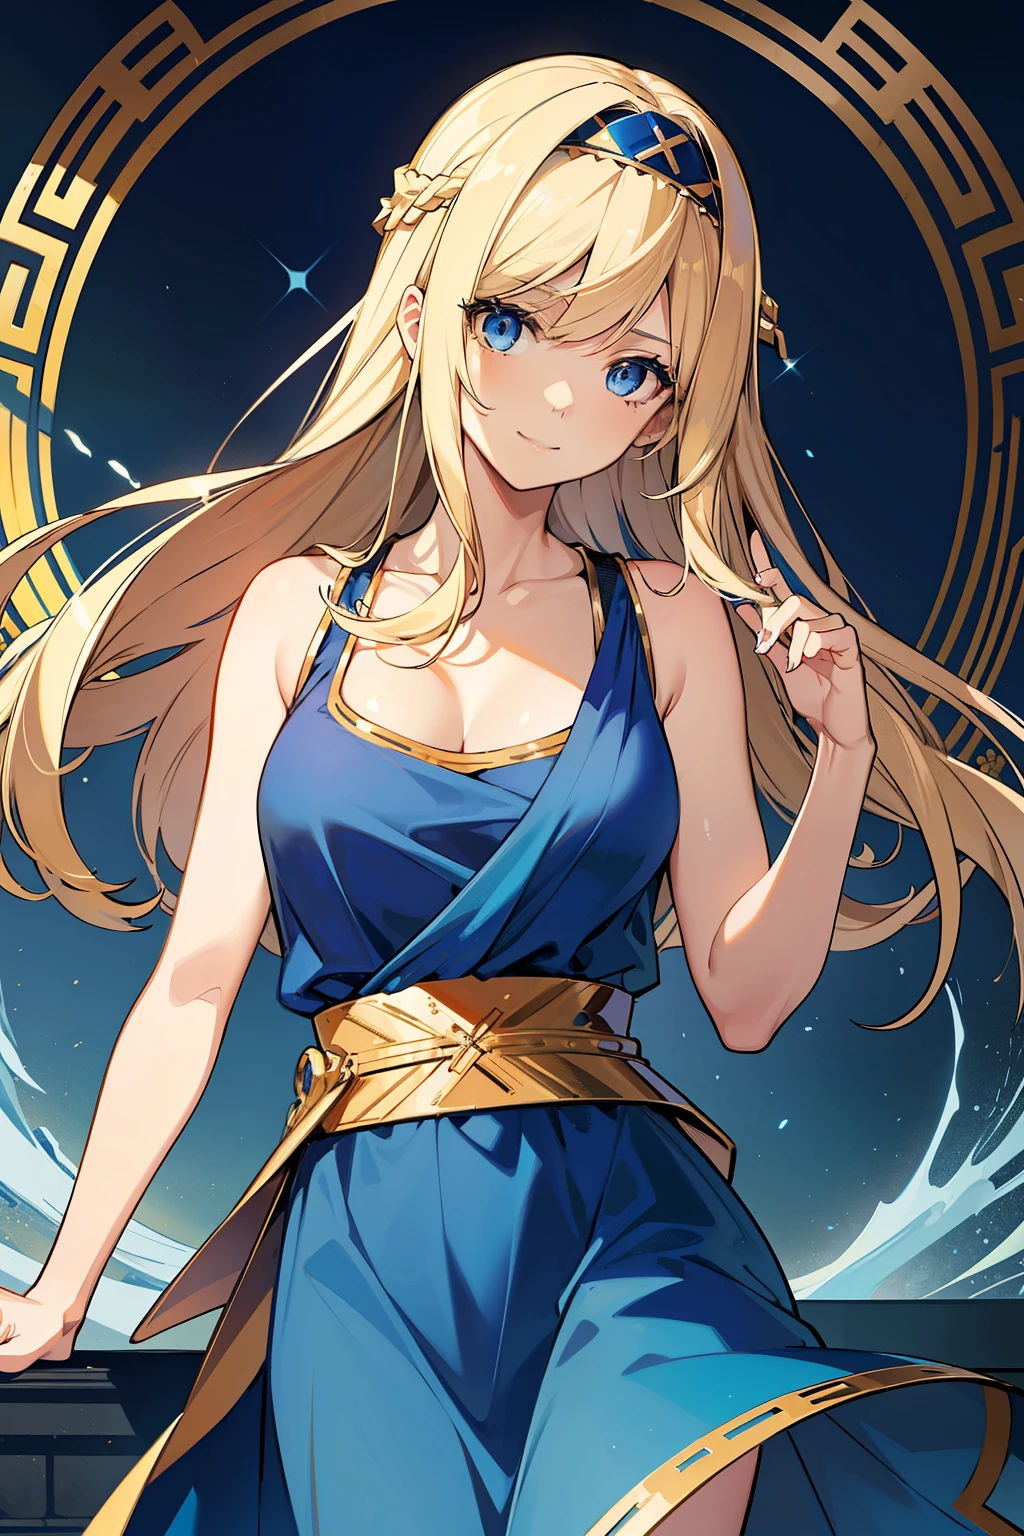 (high-quality, breathtaking),(expressive eyes, perfect face) 1girl, girl, solo, young adult, blonde hair, blue coloured eyes, stylised hair, gentle smile, medium length hair, loose hair, side bangs, curley hair, really spiky hair, looking at viewer, portrait, ancient greek clothes, blue black and white tunic, white Chlamys, sleeveless, greek, blue and gold sash, music inspired background, related to Orpheus, C cup size breasts, hair accessory blue